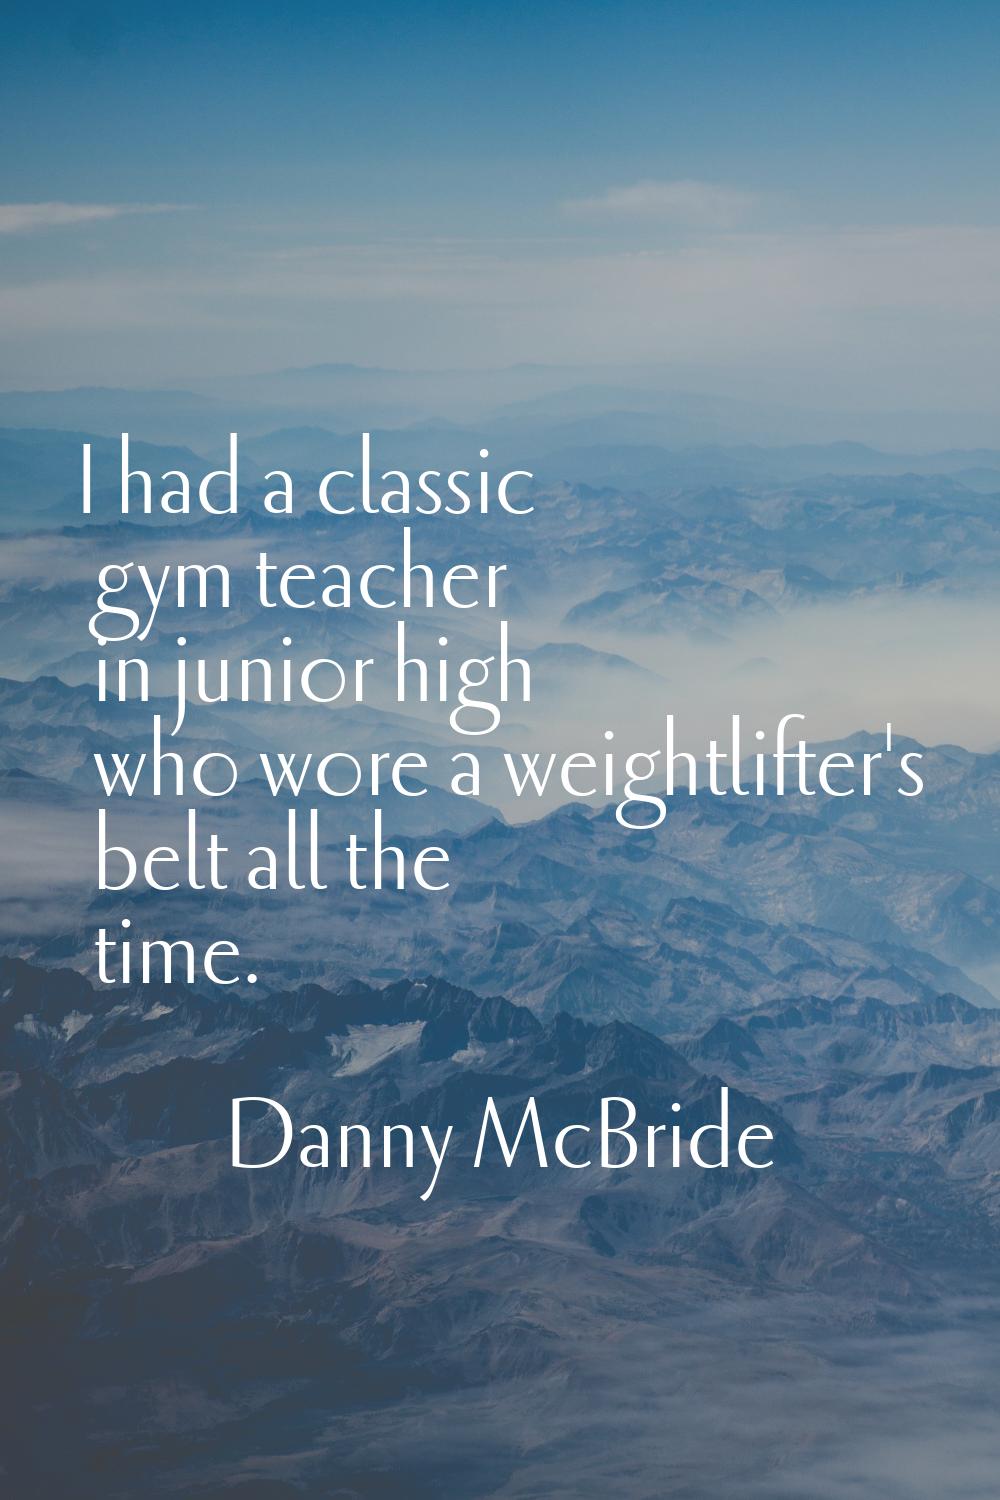 I had a classic gym teacher in junior high who wore a weightlifter's belt all the time.